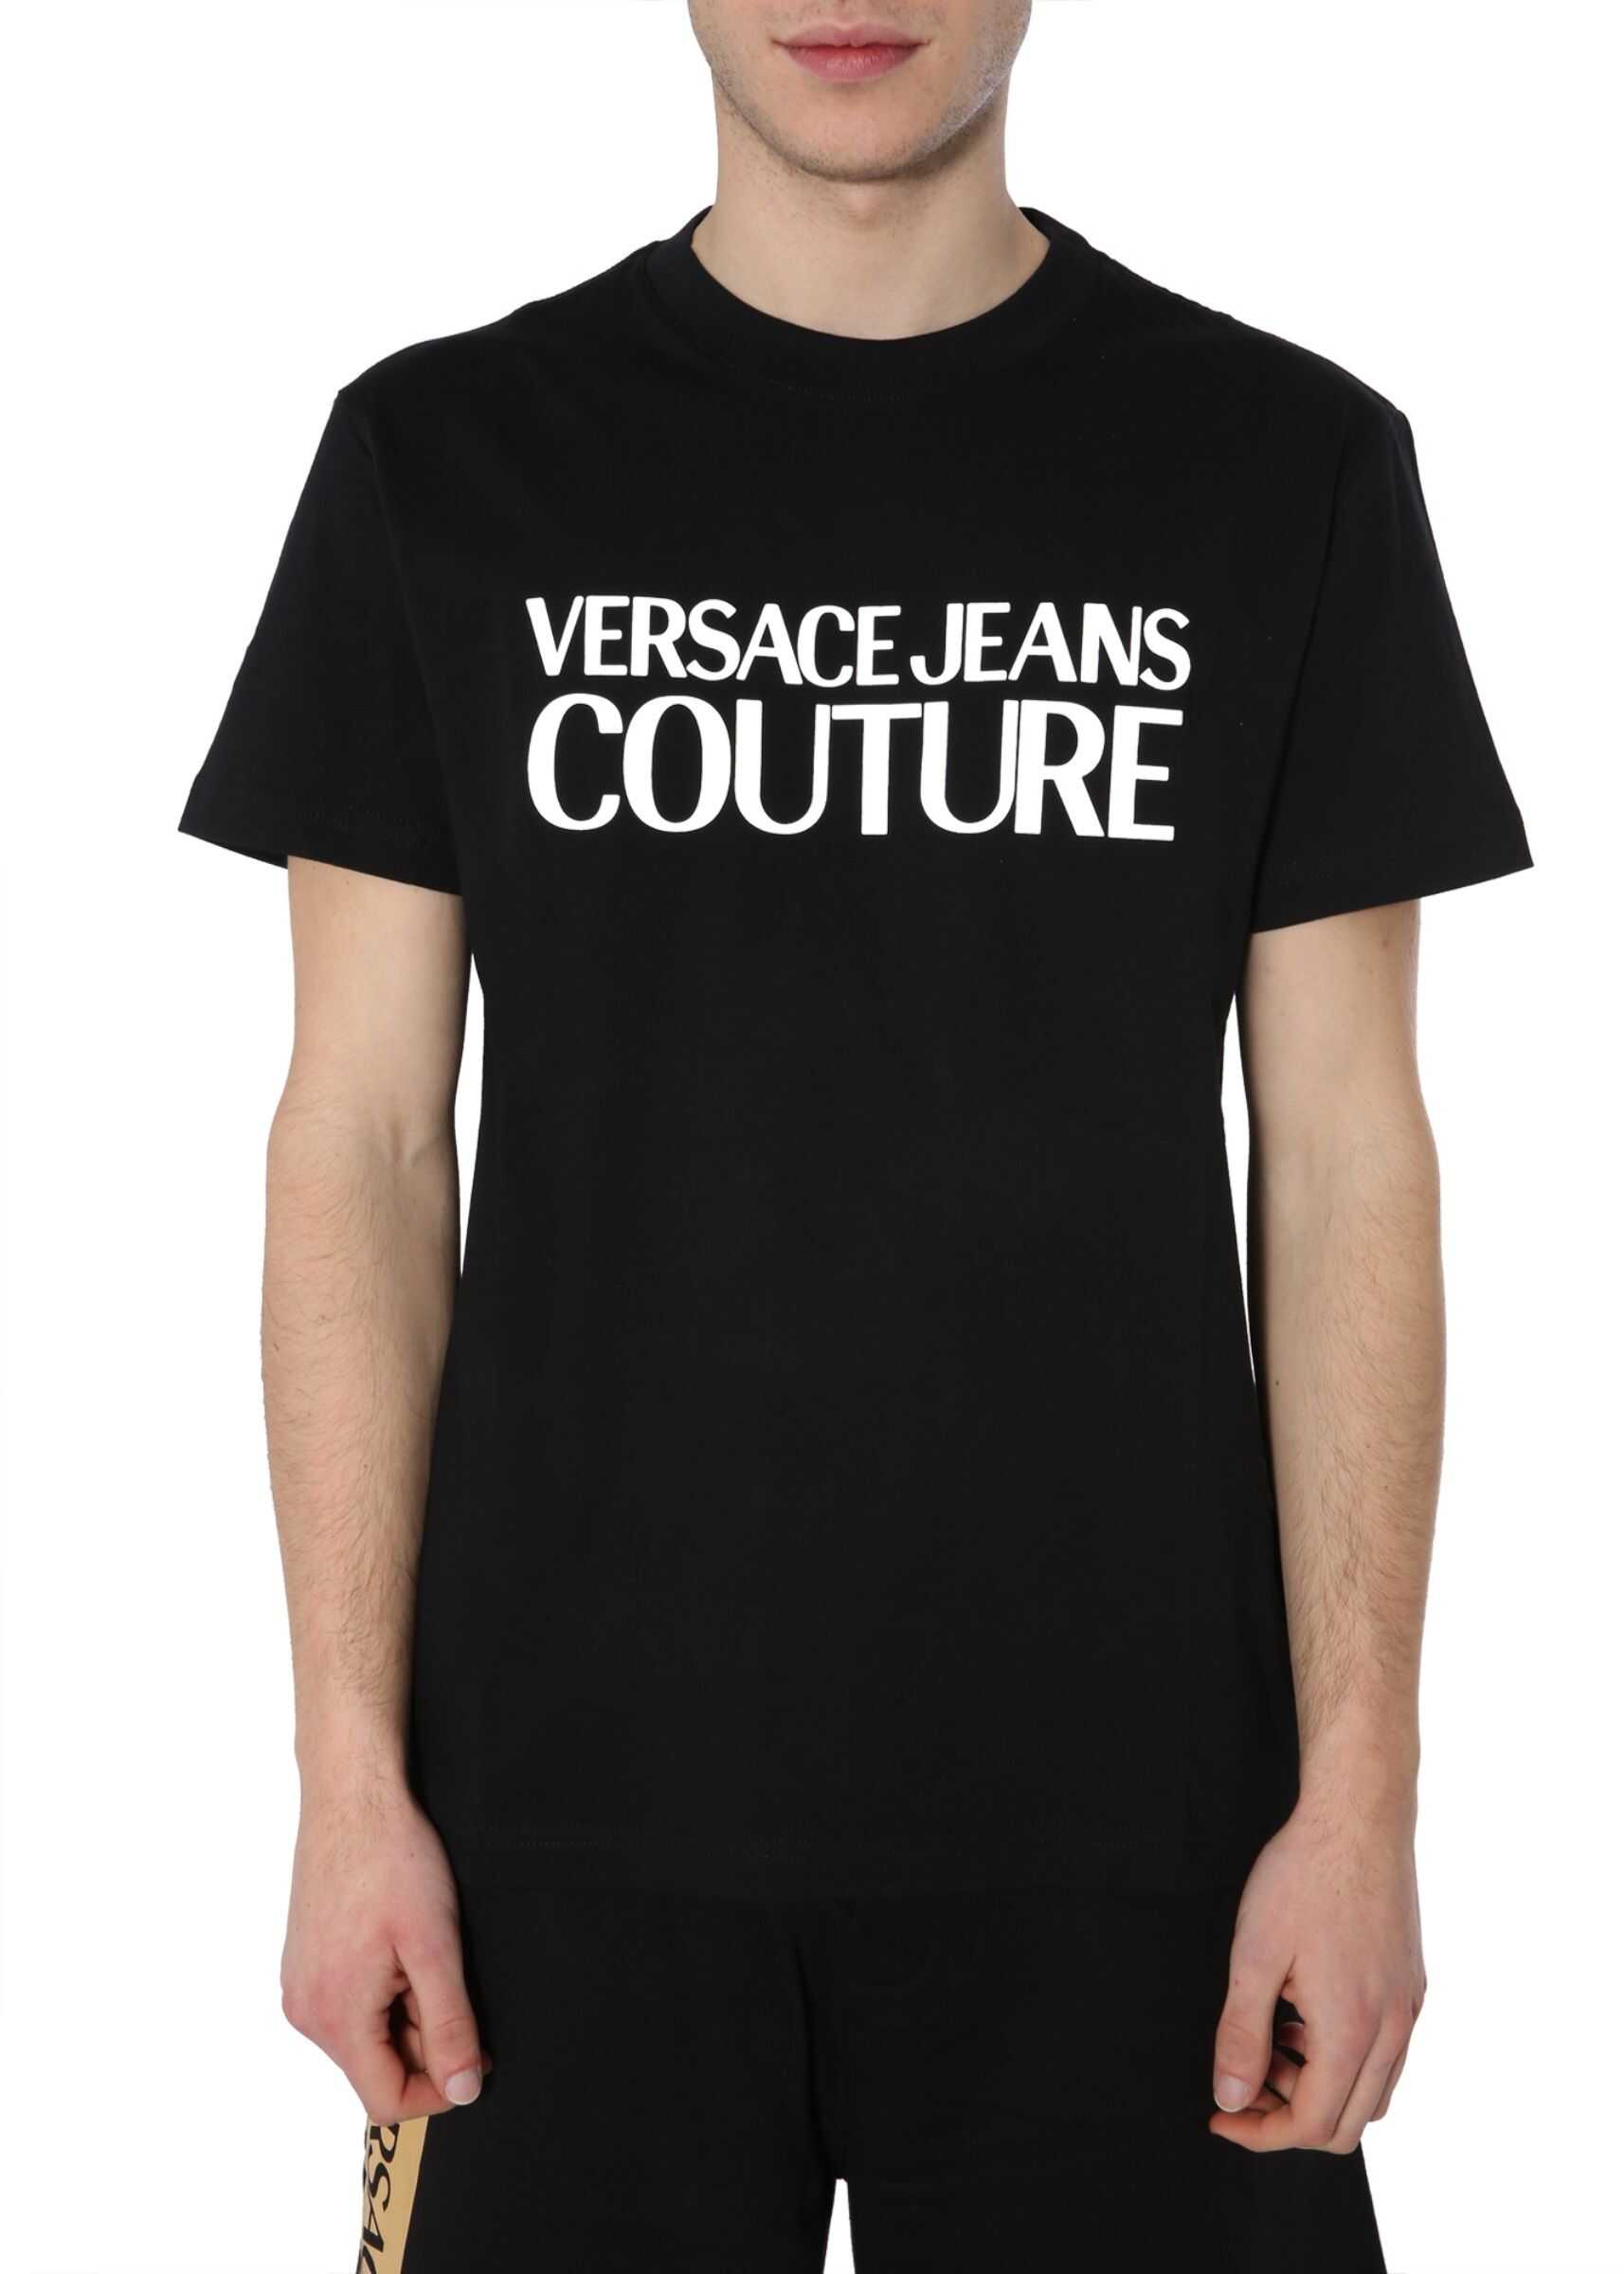 Versace Jeans Couture Round Neck T-Shirt BLACK